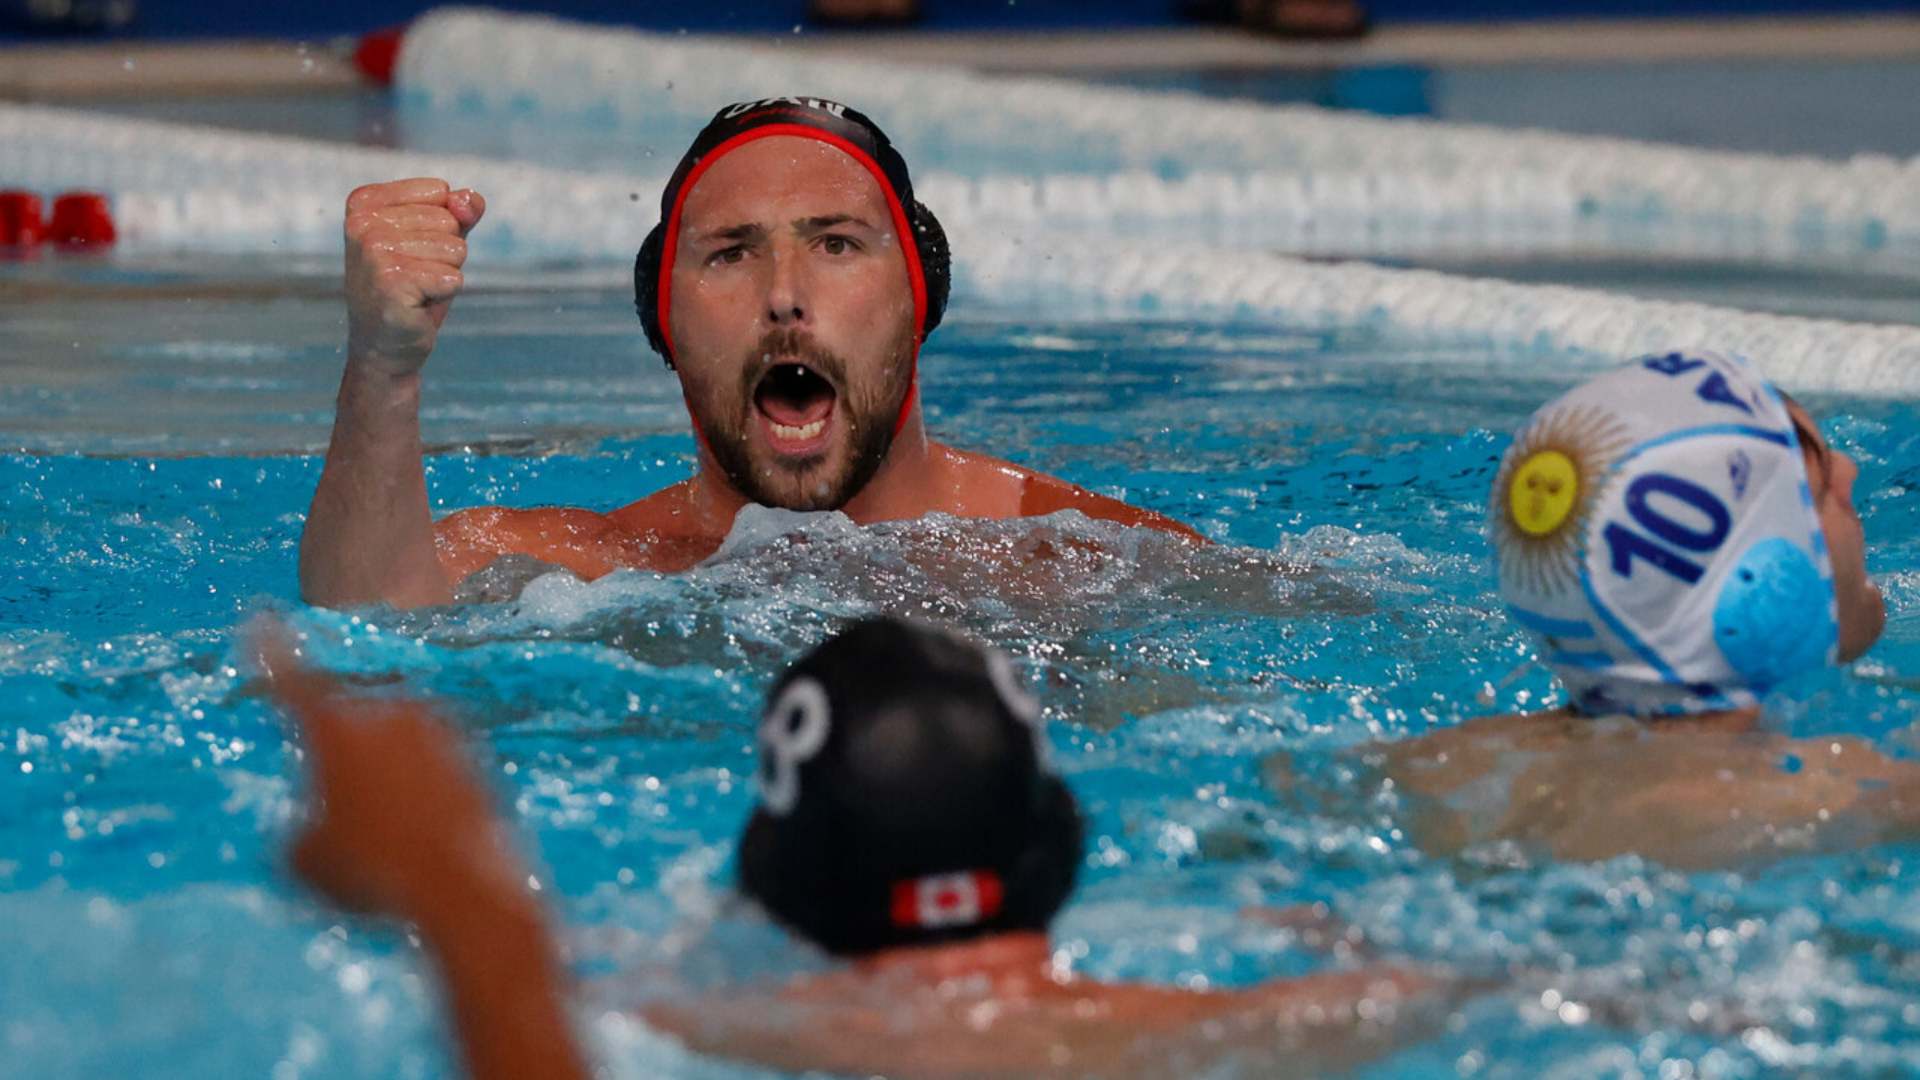 Canada secures Group B in water polo by beating Argentina